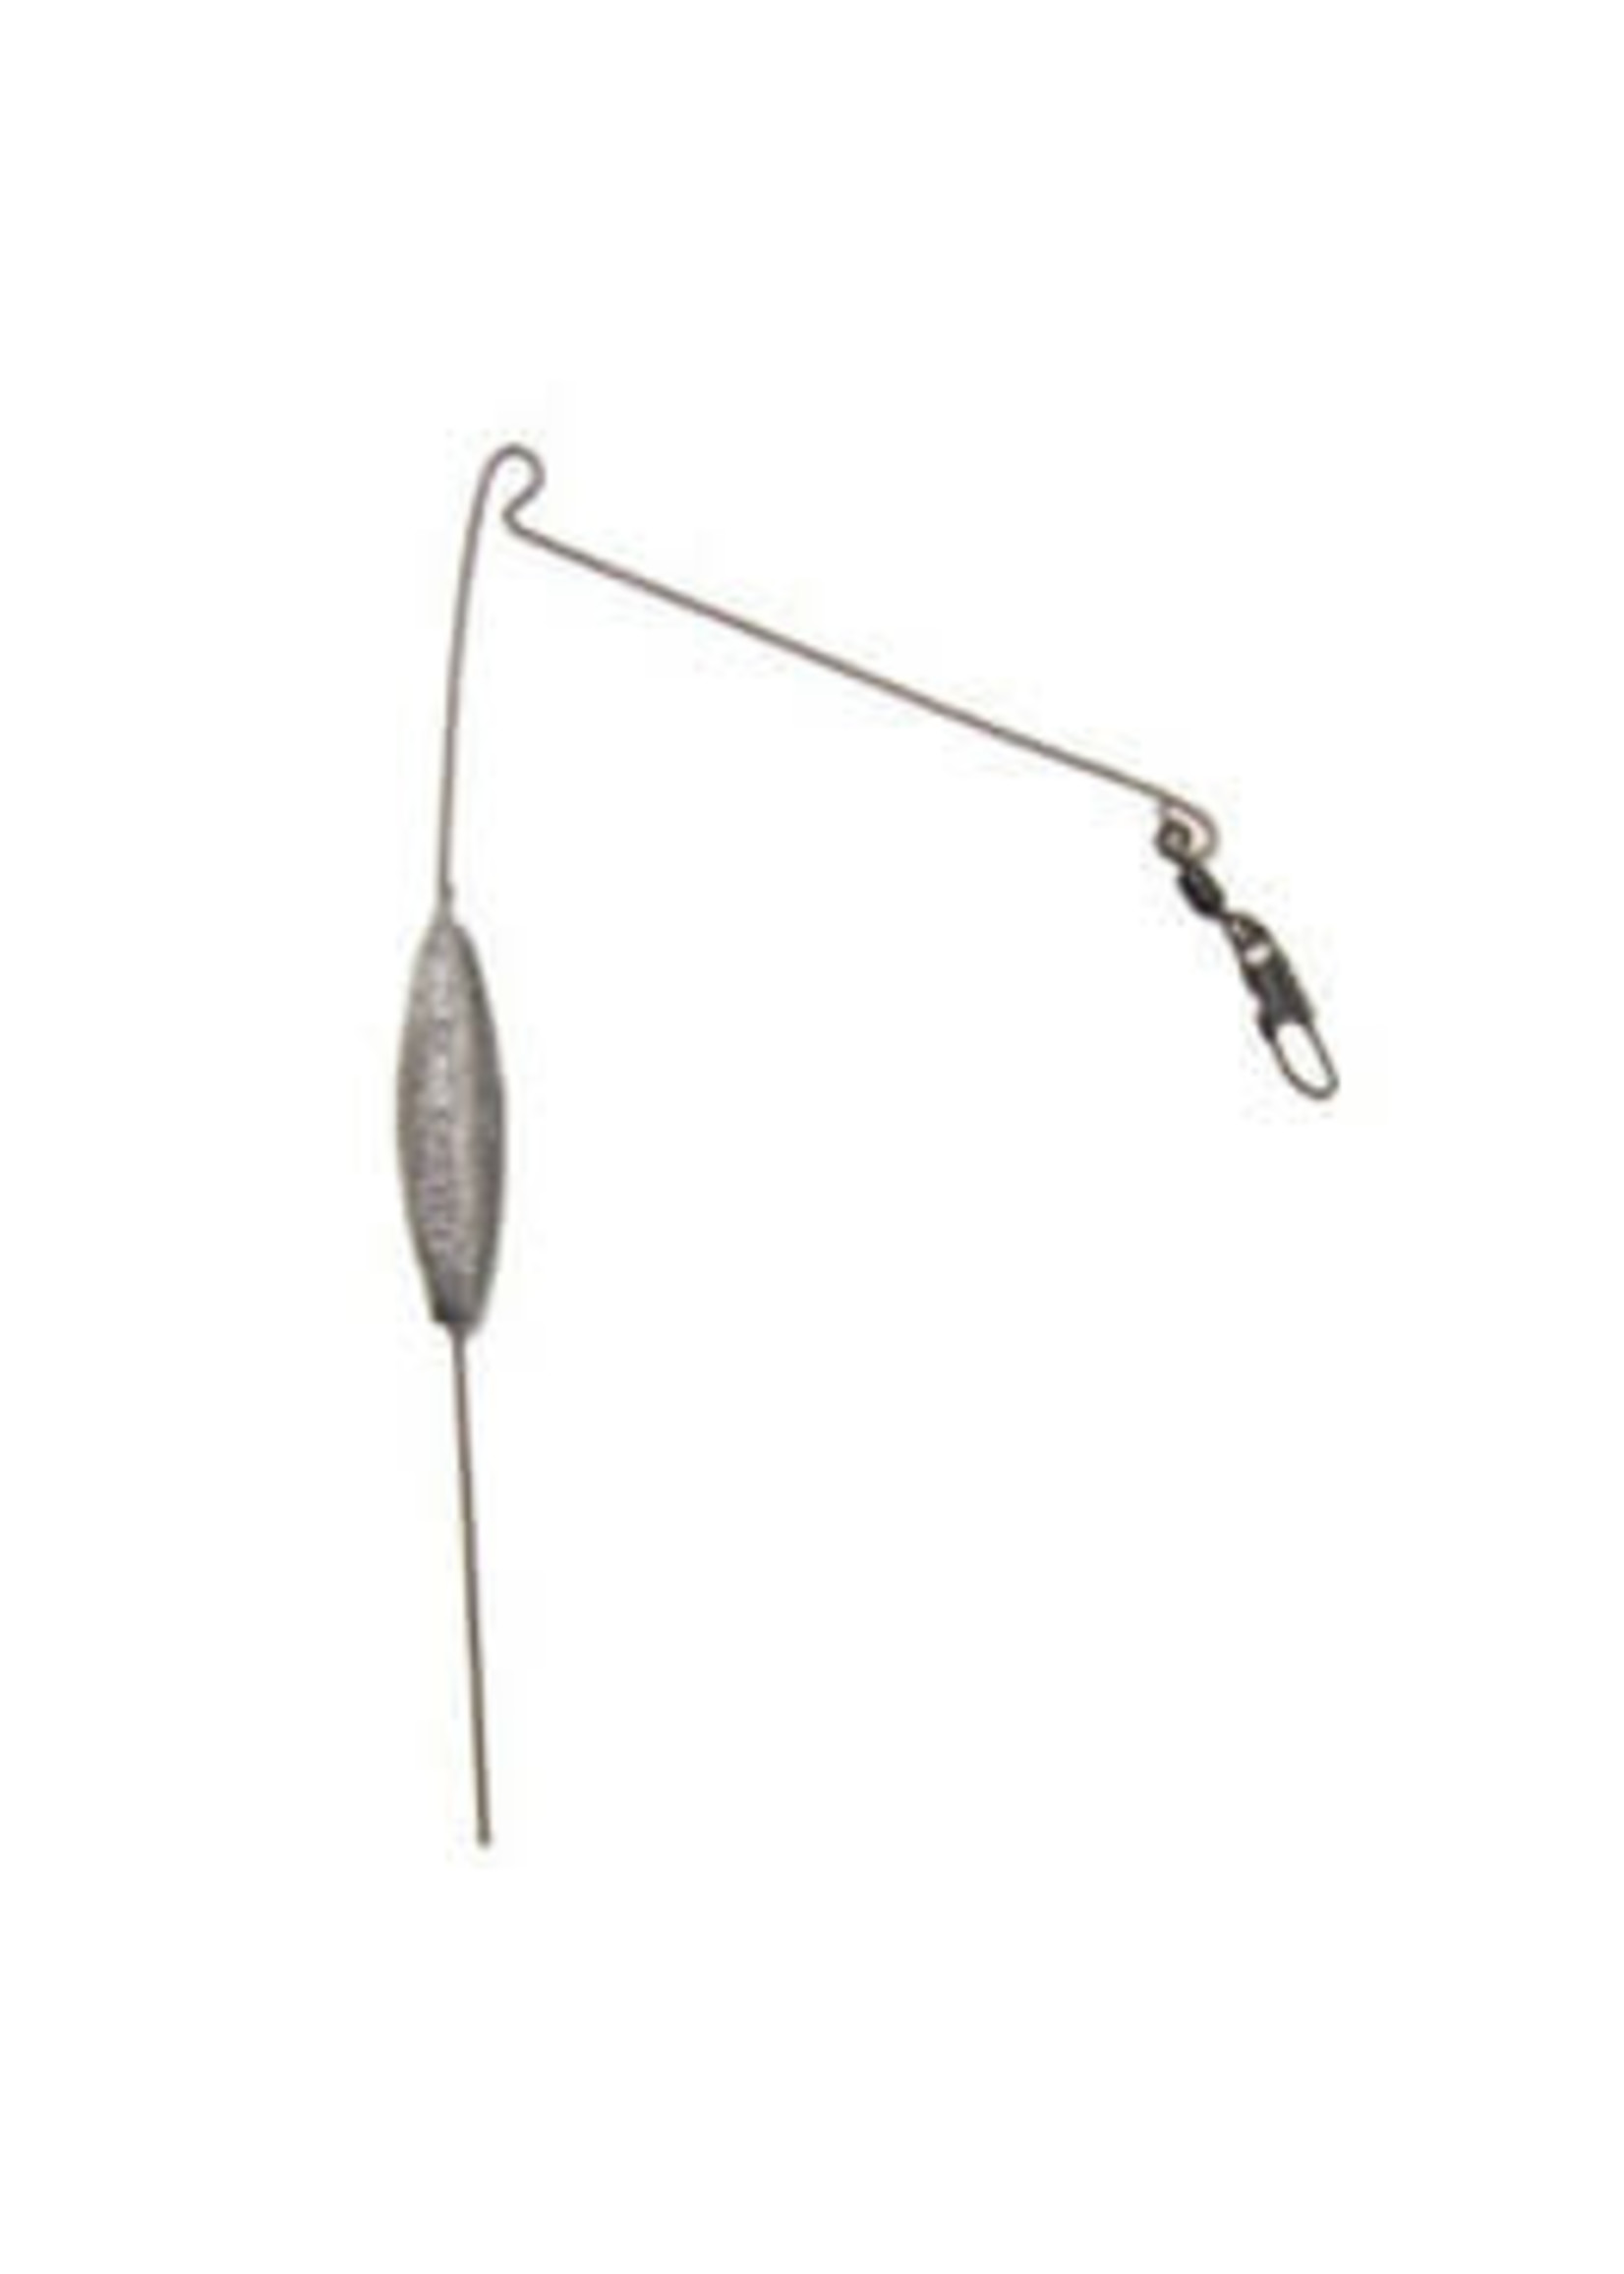 BELL OUTDOOR PRODUCTS SILVER CREEK BOTTOM BOUNCERS 2oz 2PK